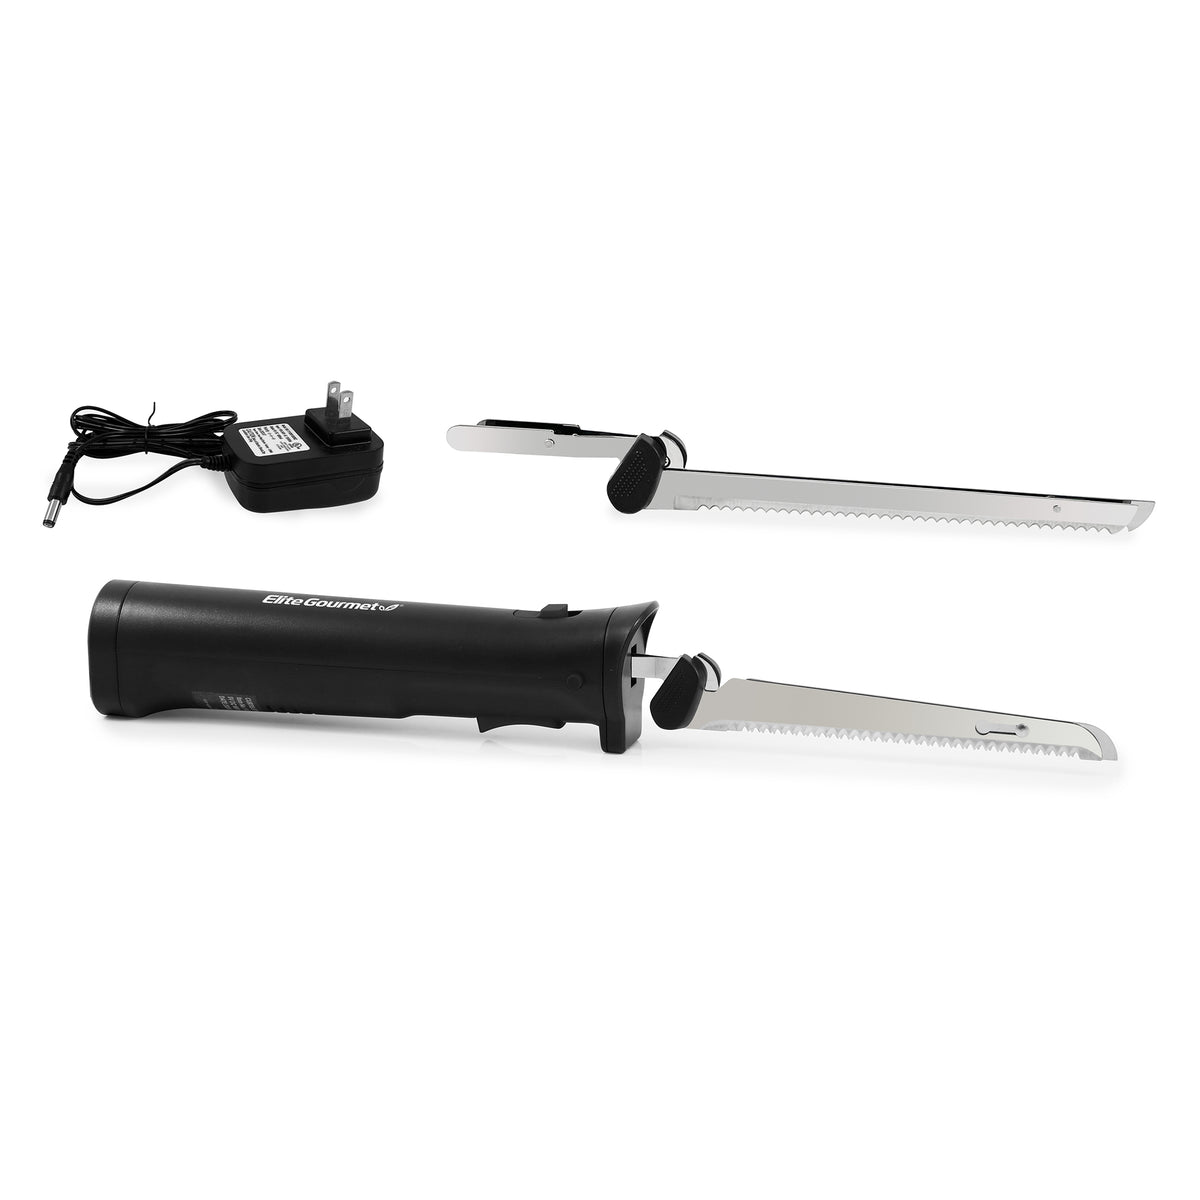 Electric Knife for Carving Meats, Poultry, Bread, Crafting Foam & More